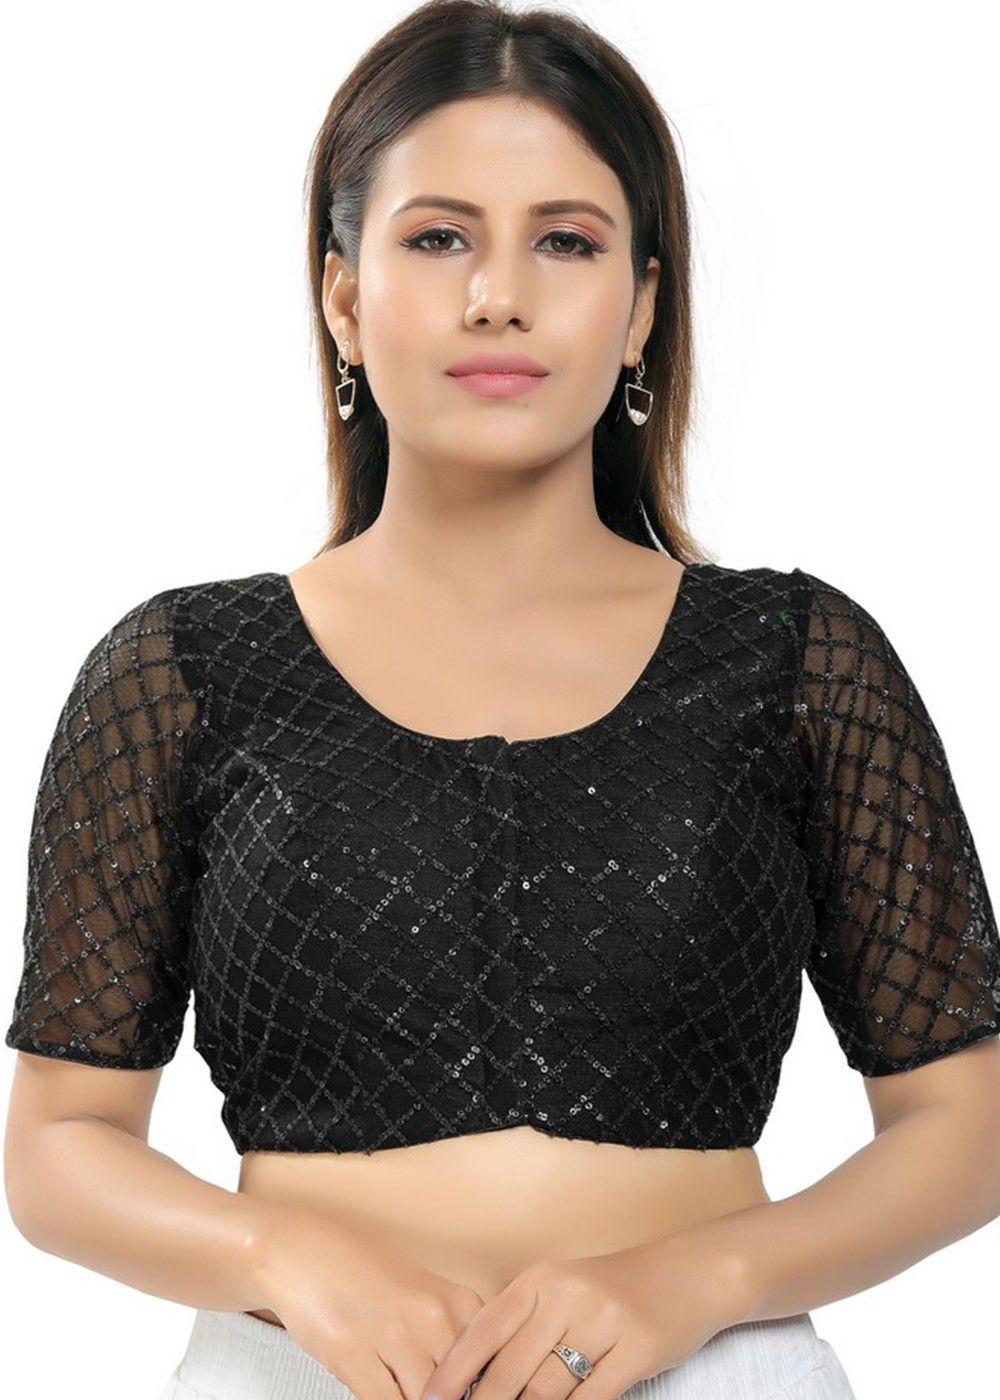 Net Saree Blouse Designs Front And Back Neck Designs New Model Net Blouse  Designs Beautiful Trends | Net Saree Blouse Designs Front And Back Neck  Designs New Model Net Blouse Designs Beautiful